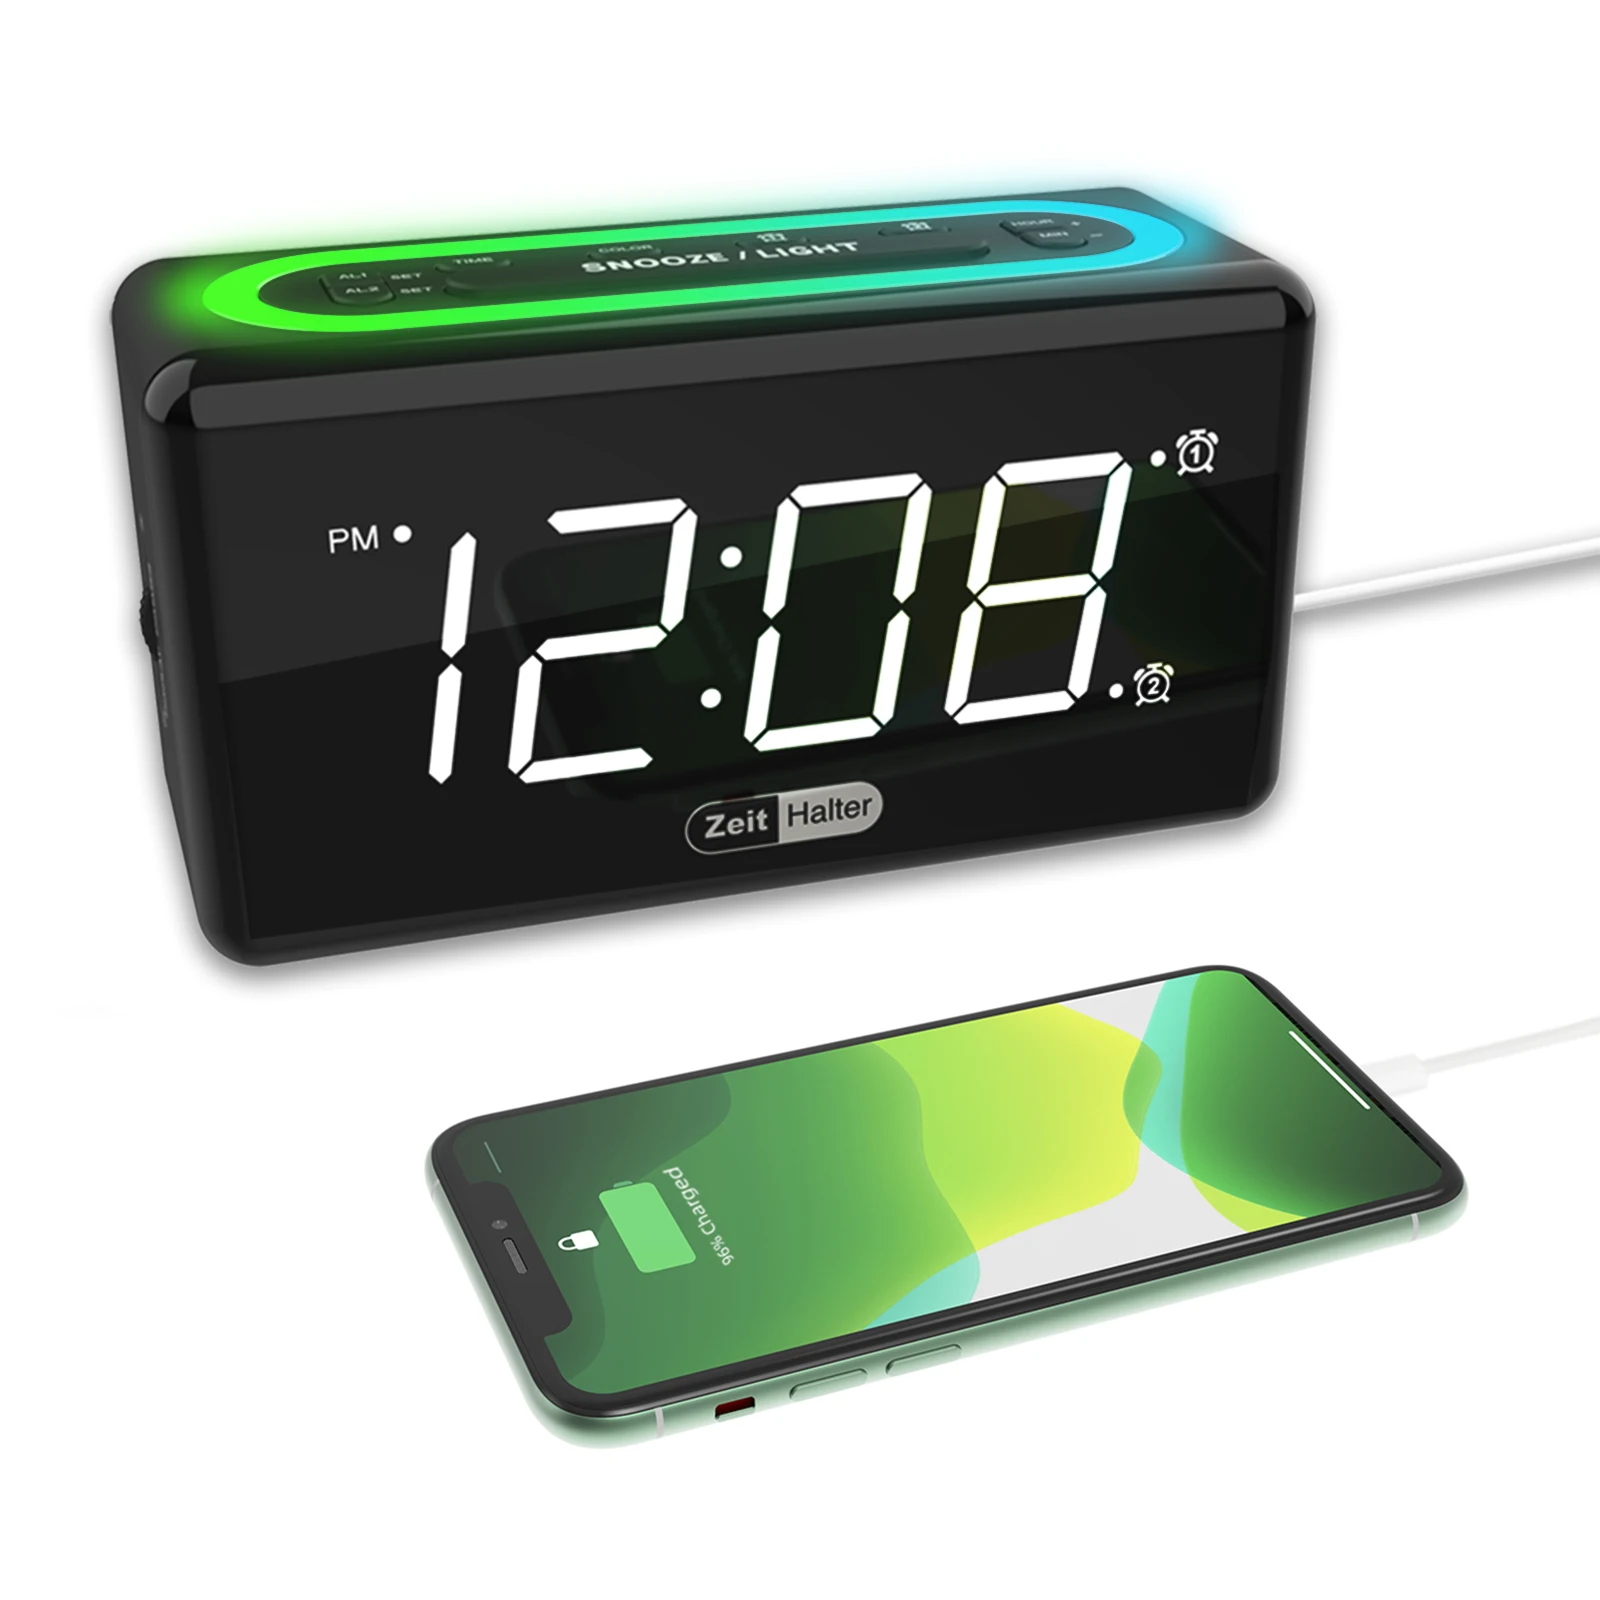 

LED number 7 color changing light USB charger dual bell alarm clock alarm clock modern design, Black, white or customized